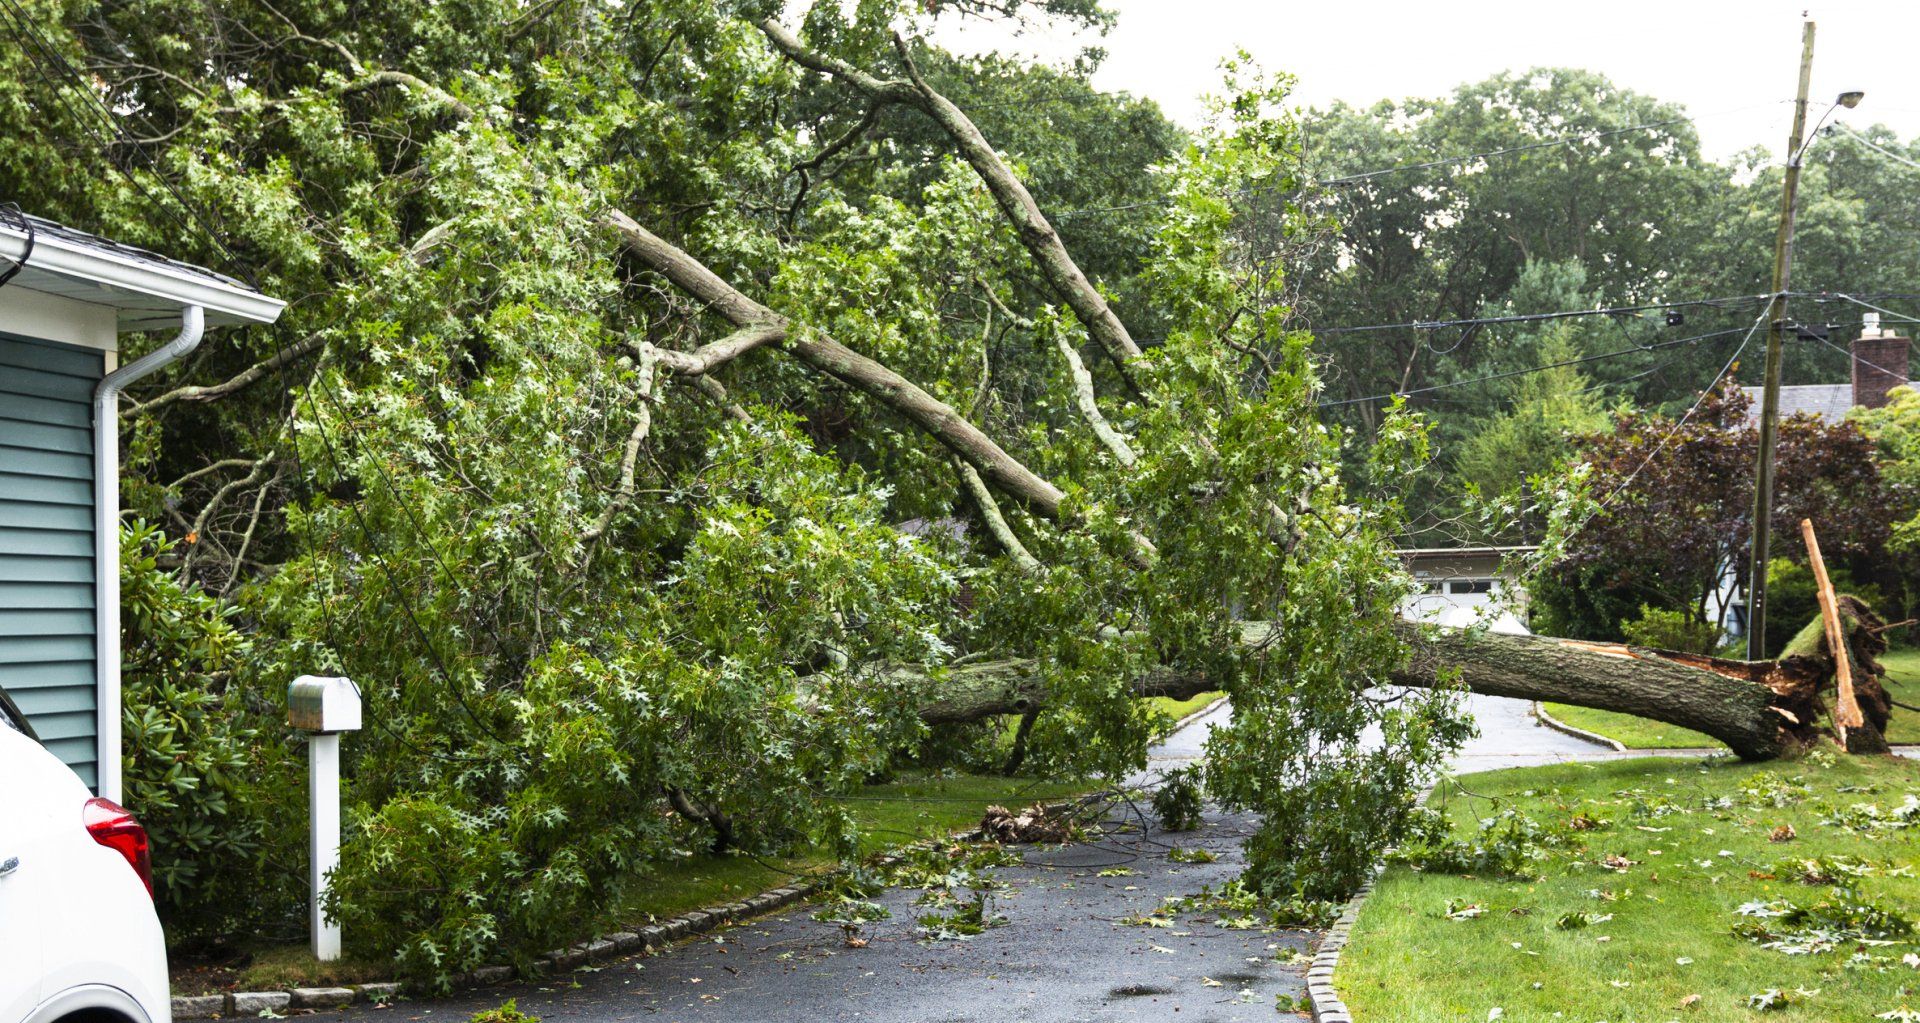 Toppled Over Tree Across Driveway On To House During Storm - New Castle, DE - 3 Brothers Tree Services